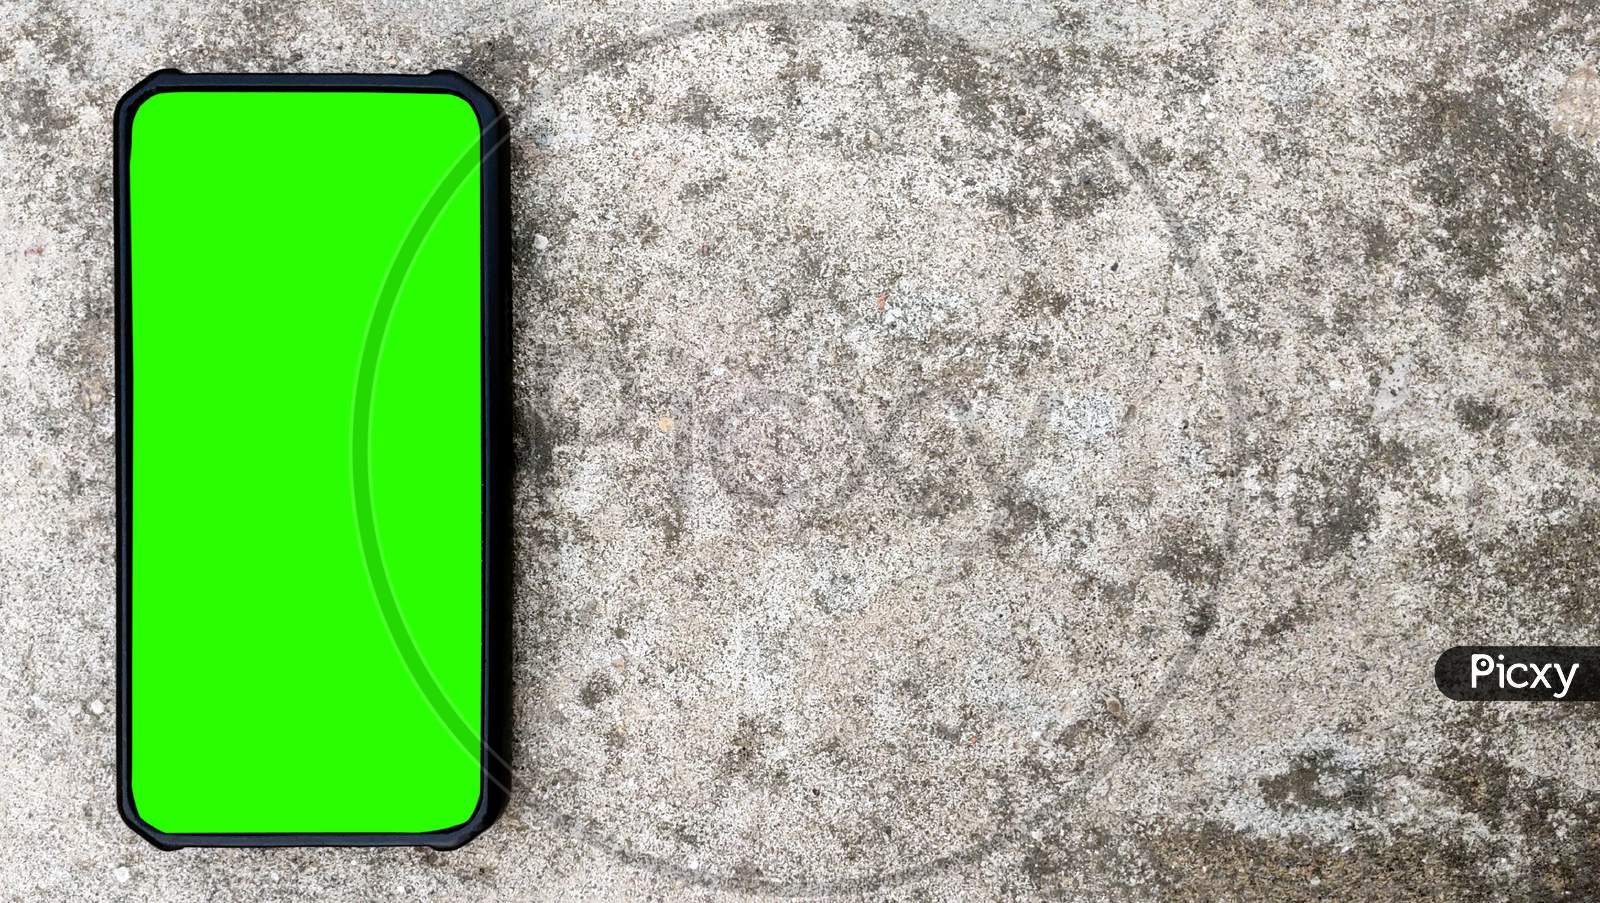 Top Angle Shot Of Black Smartphone With Green Screen On Concrete Background. Copy Space For Text